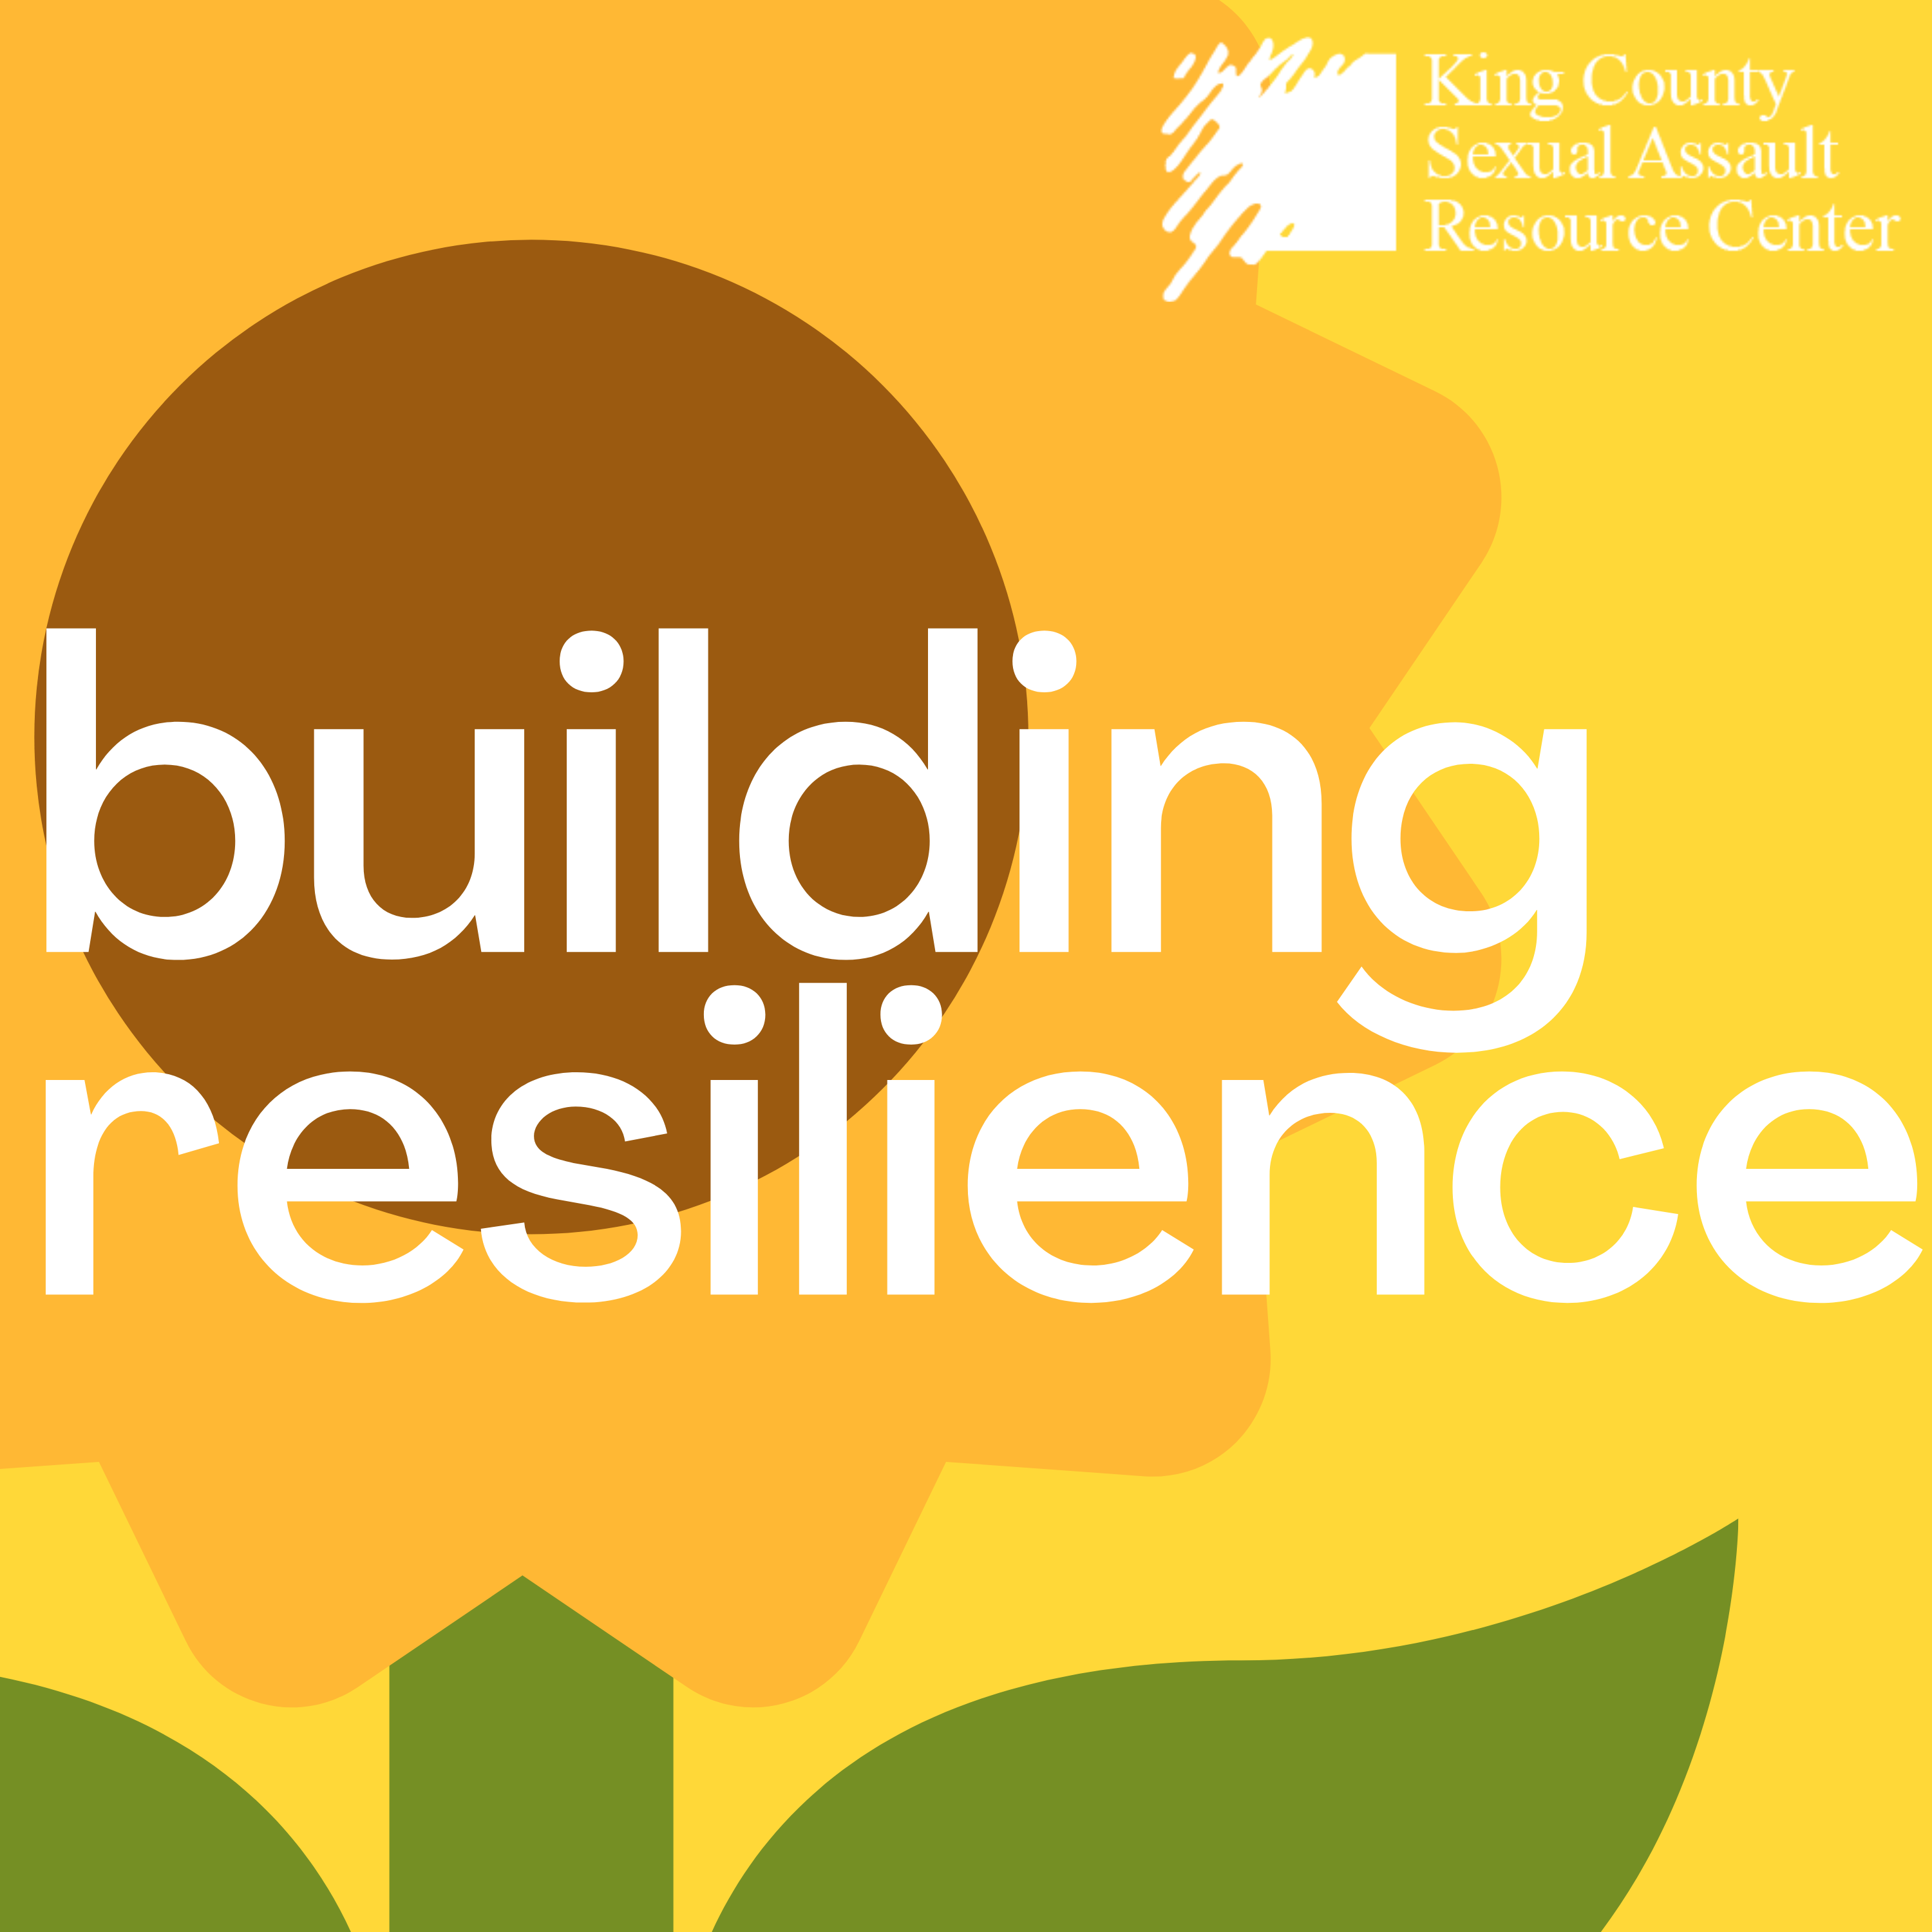 Introducing "Building Resilience"